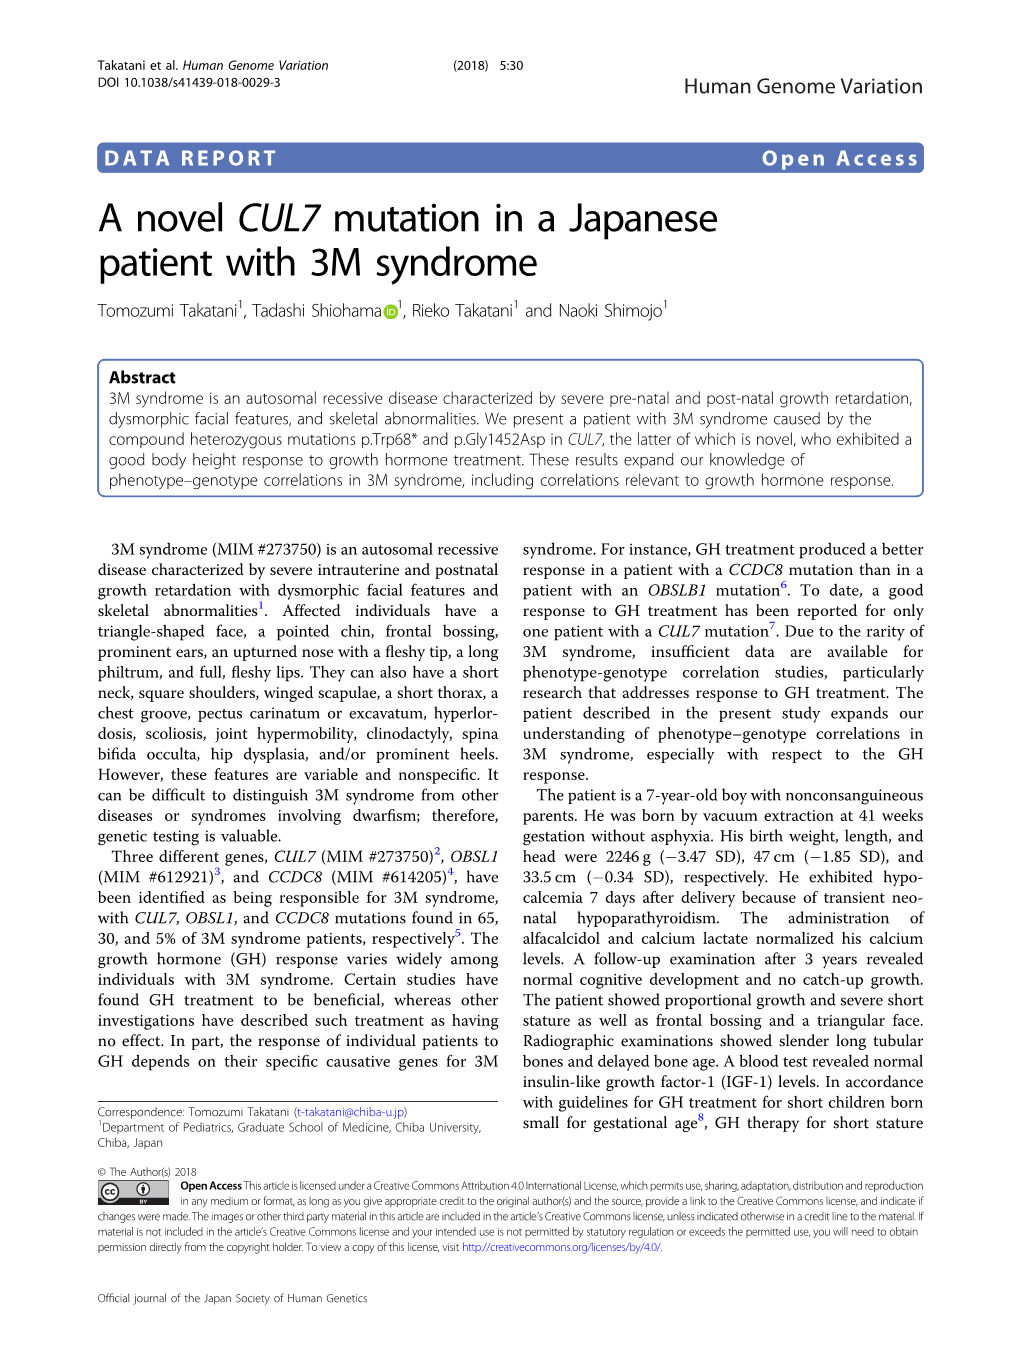 A Novel CUL7 Mutation in a Japanese Patient with 3M Syndrome